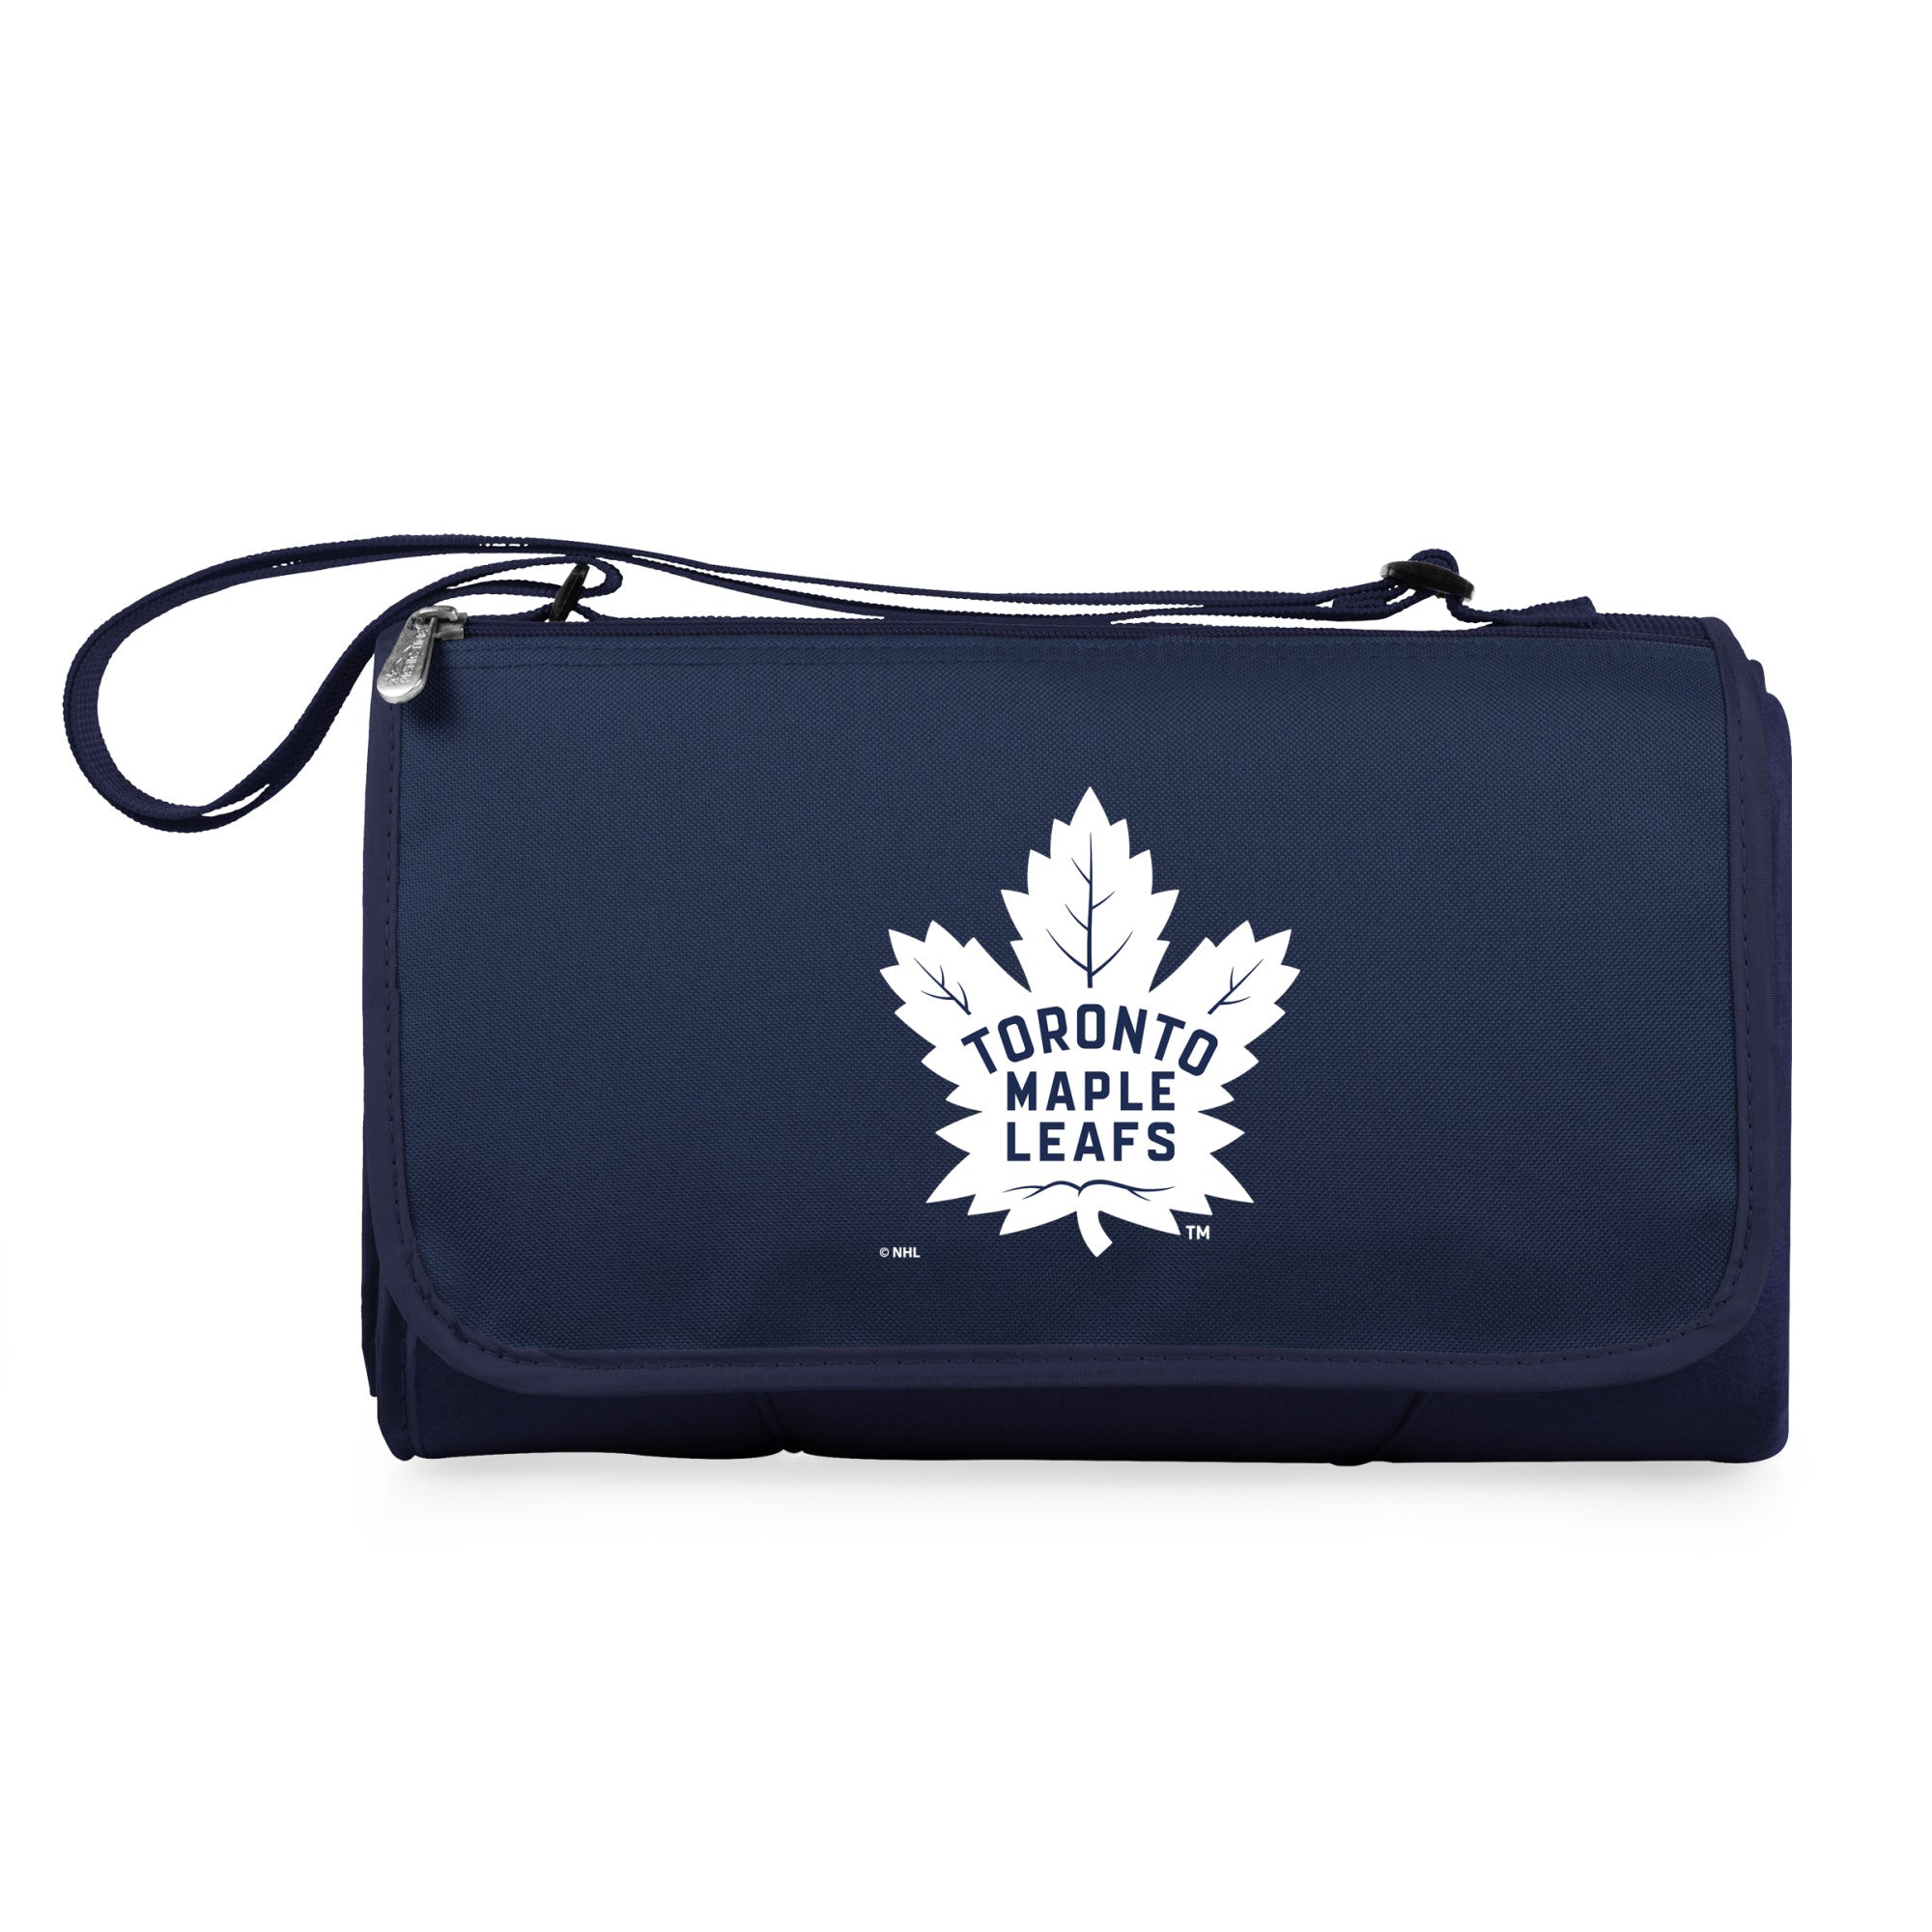 Toronto Maple Leafs - Blanket Tote Outdoor Picnic Blanket